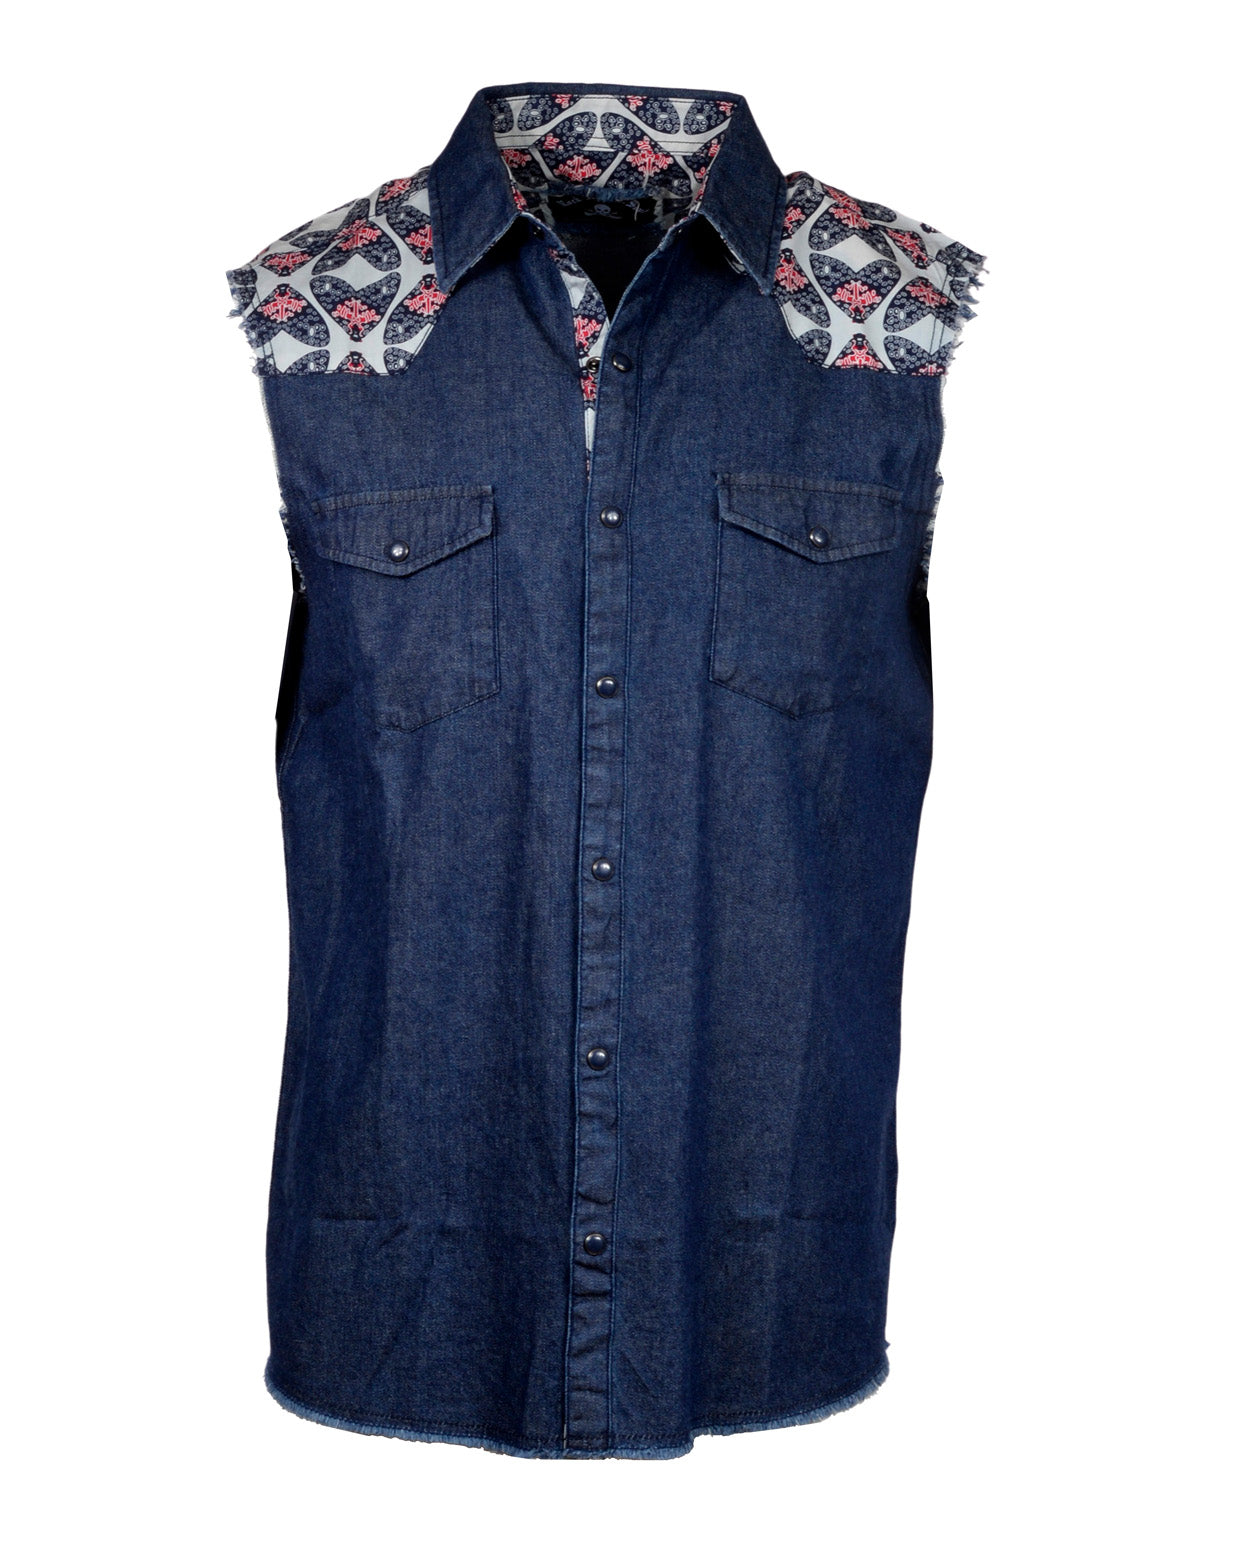 Men's Casual Fashion Button Up Sleeveless Shirt - Drinkin and Dreamin in Navy by Rock Roll n Soul